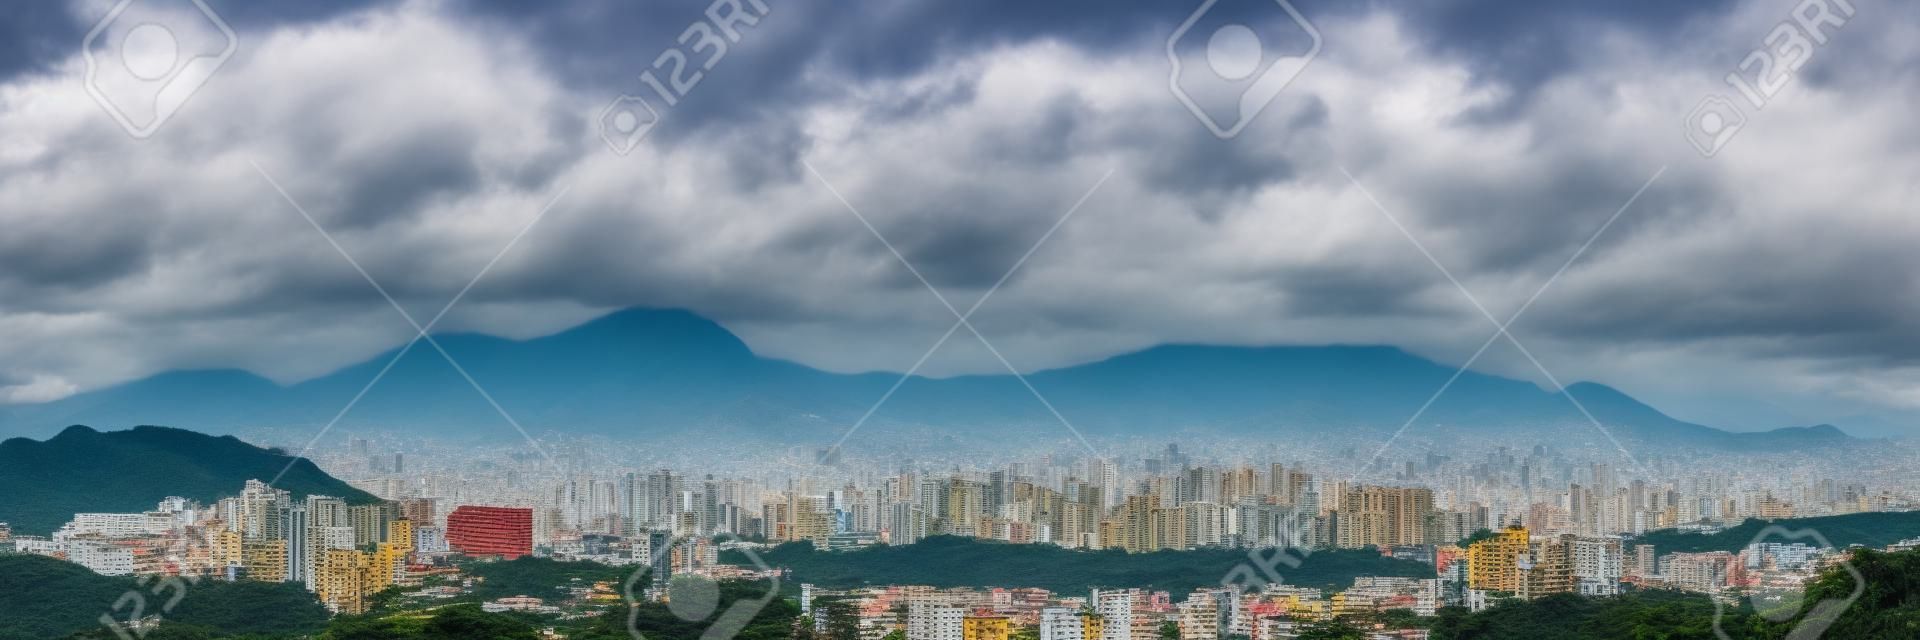 View of the city of Caracas and its iconic mountain el Avila or Waraira Repano.